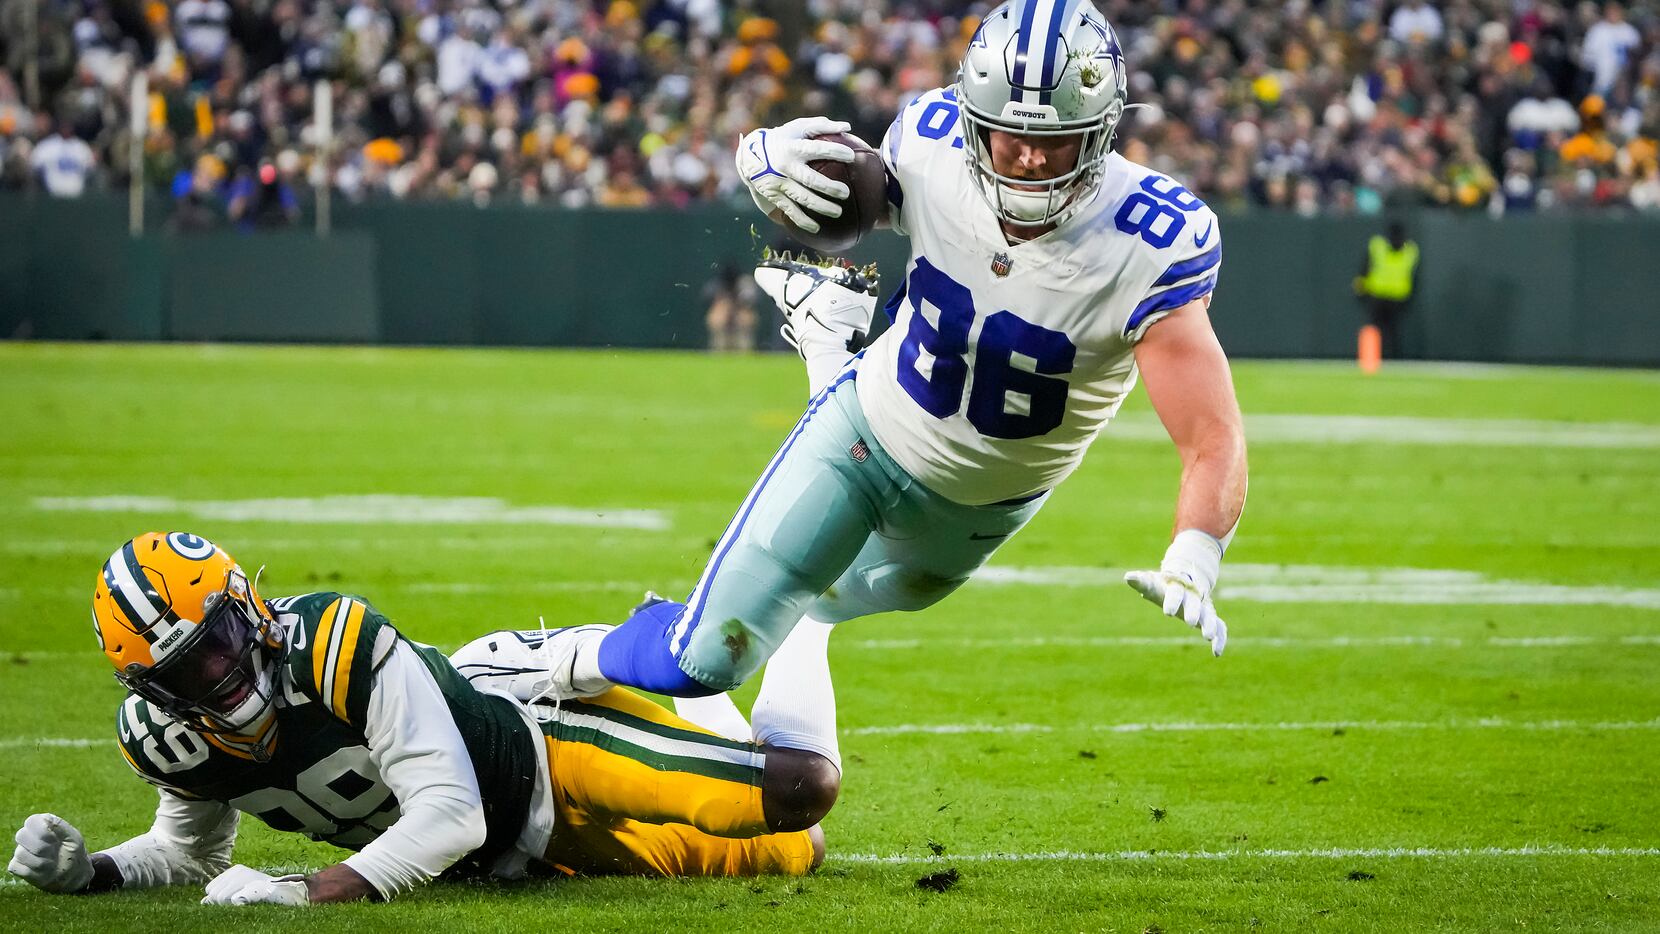 Photos From The Green Bay Packers vs Dallas Cowboys Playoff Game • Green  Bay Photographer